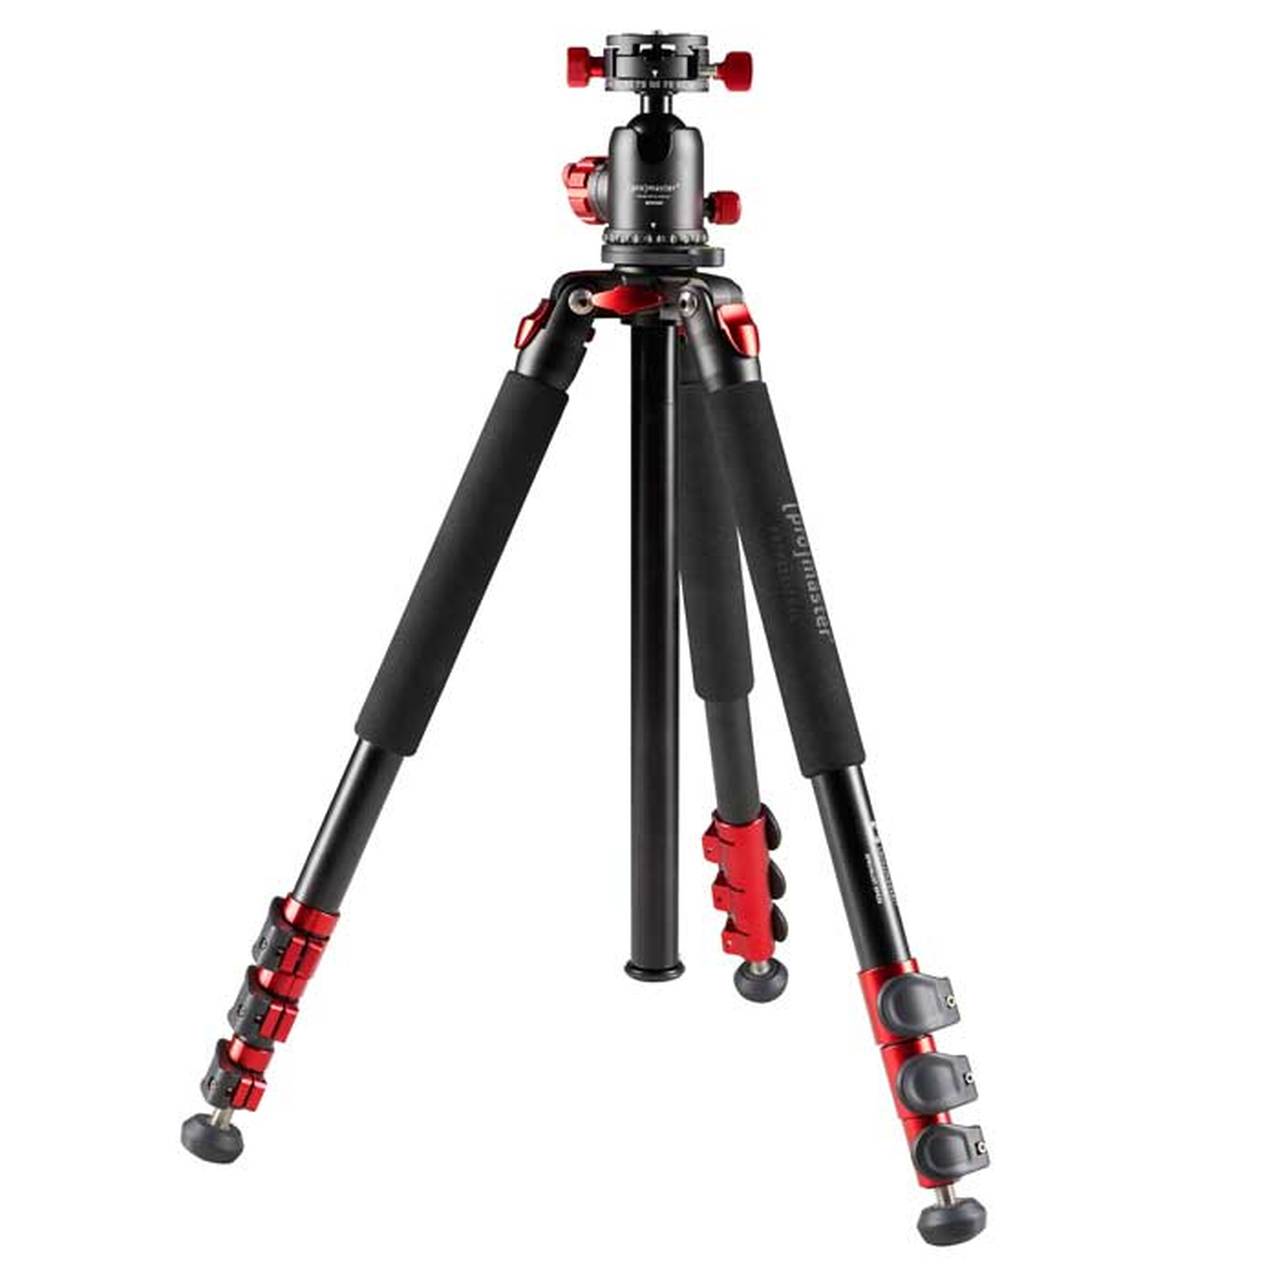 Promaster 8118 SP425 Professional Tripod Kit with Head - Specialist Series